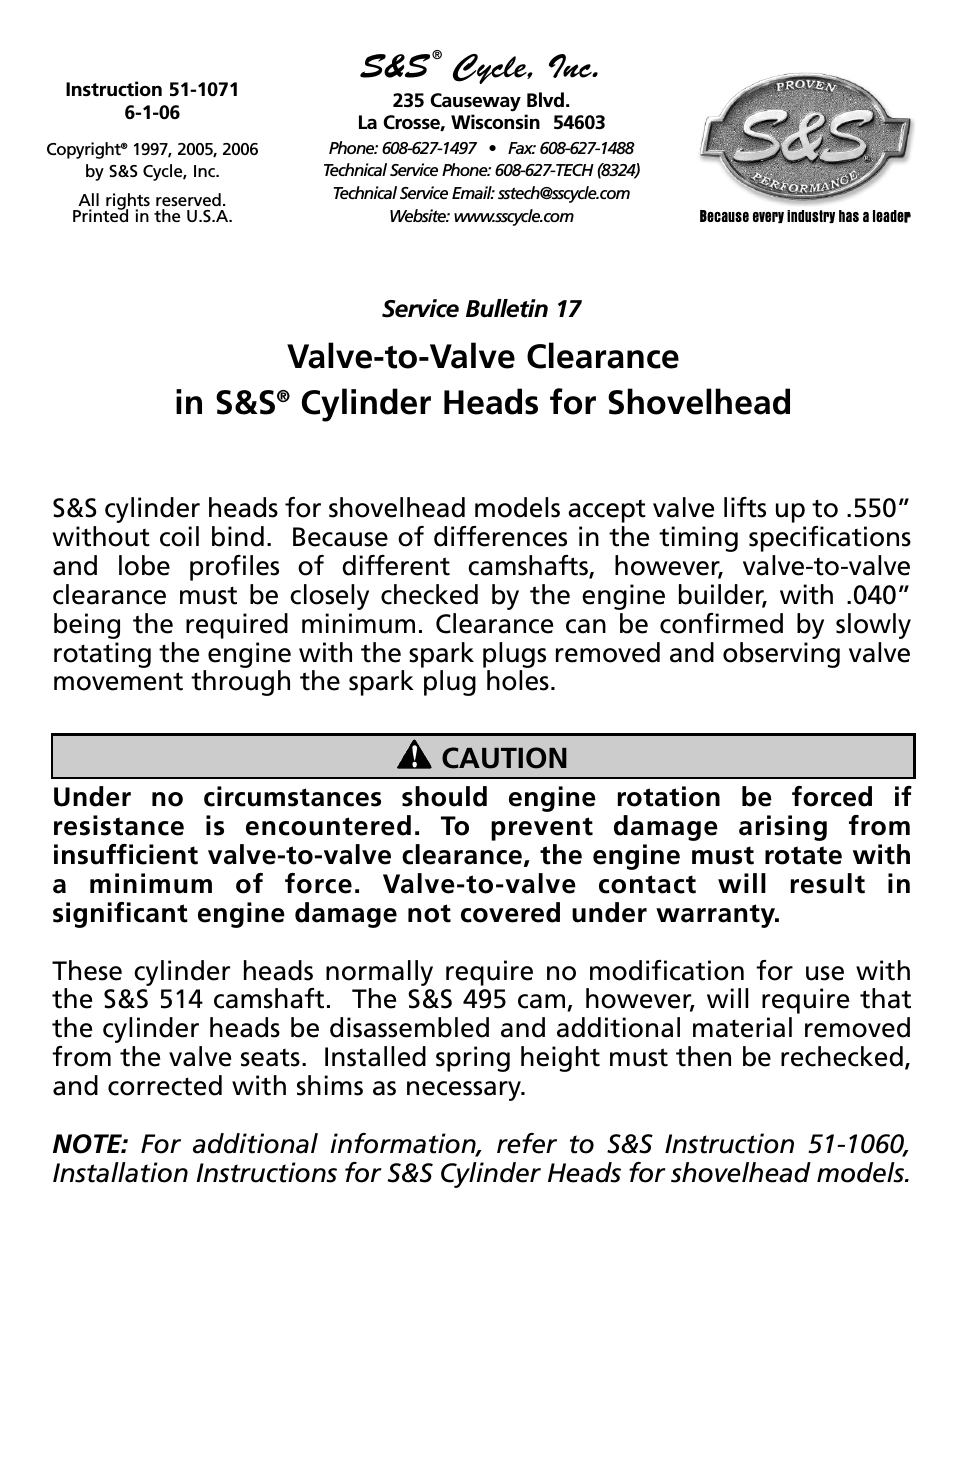 Valve-to-Valve Clearance in S&S Cylinder Heads for Shovelhead